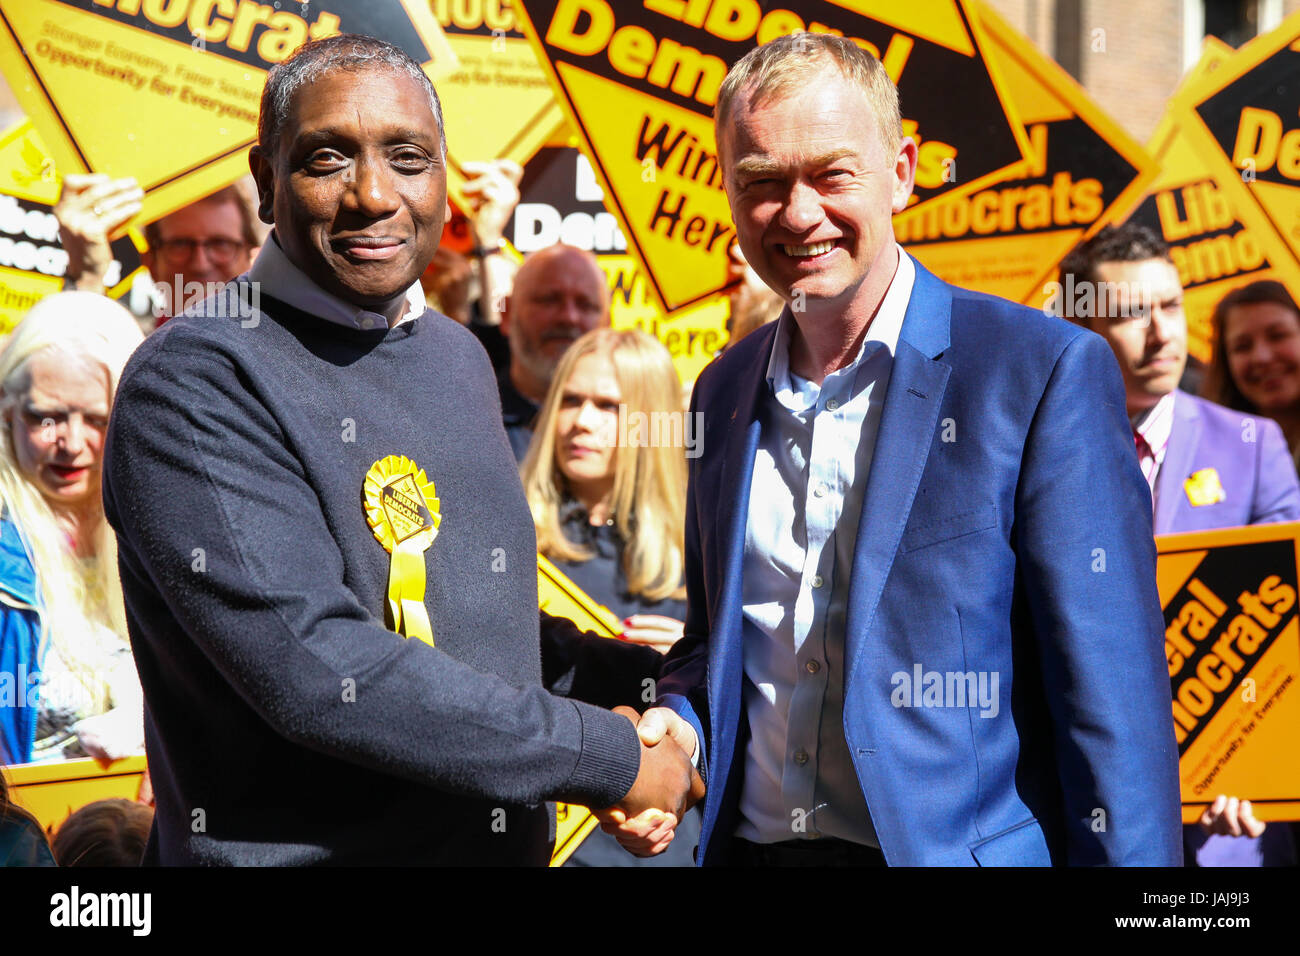 Tim Farron Leader of the Liberal Democrats, campaigns in Hornsey, North London with Lib Dem candidate Dawn Barnes. Seat currently held by Labour’s Catherine West MP.  Featuring: Brian Haley, Tim Farron Where: London, United Kingdom When: 01 May 2017 Credit: Dinendra Haria/WENN.com Stock Photo